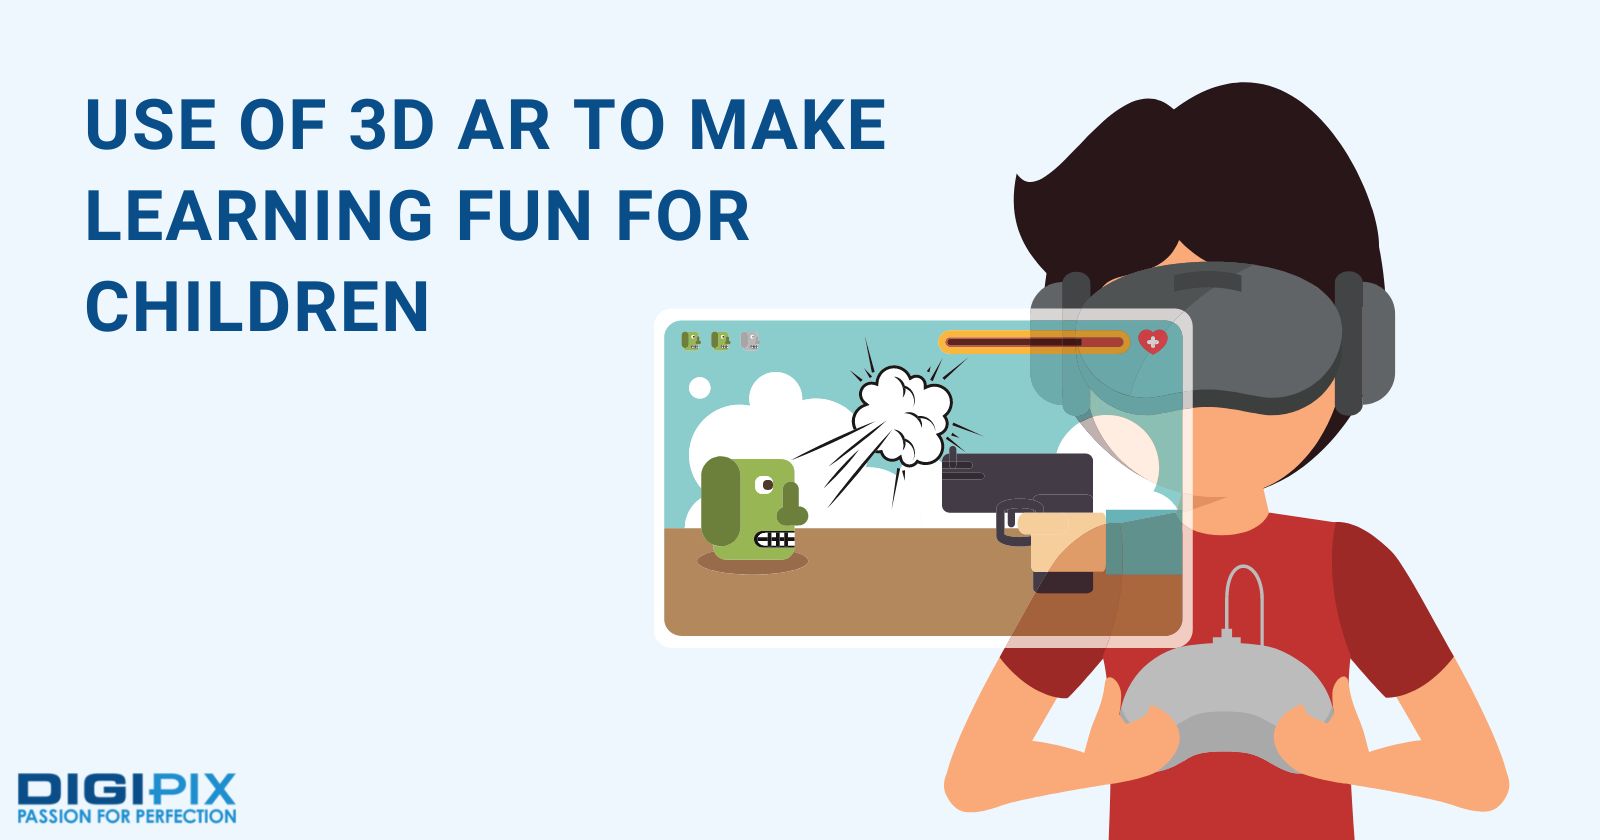 Use of 3D AR to make learning fun for children in classroom